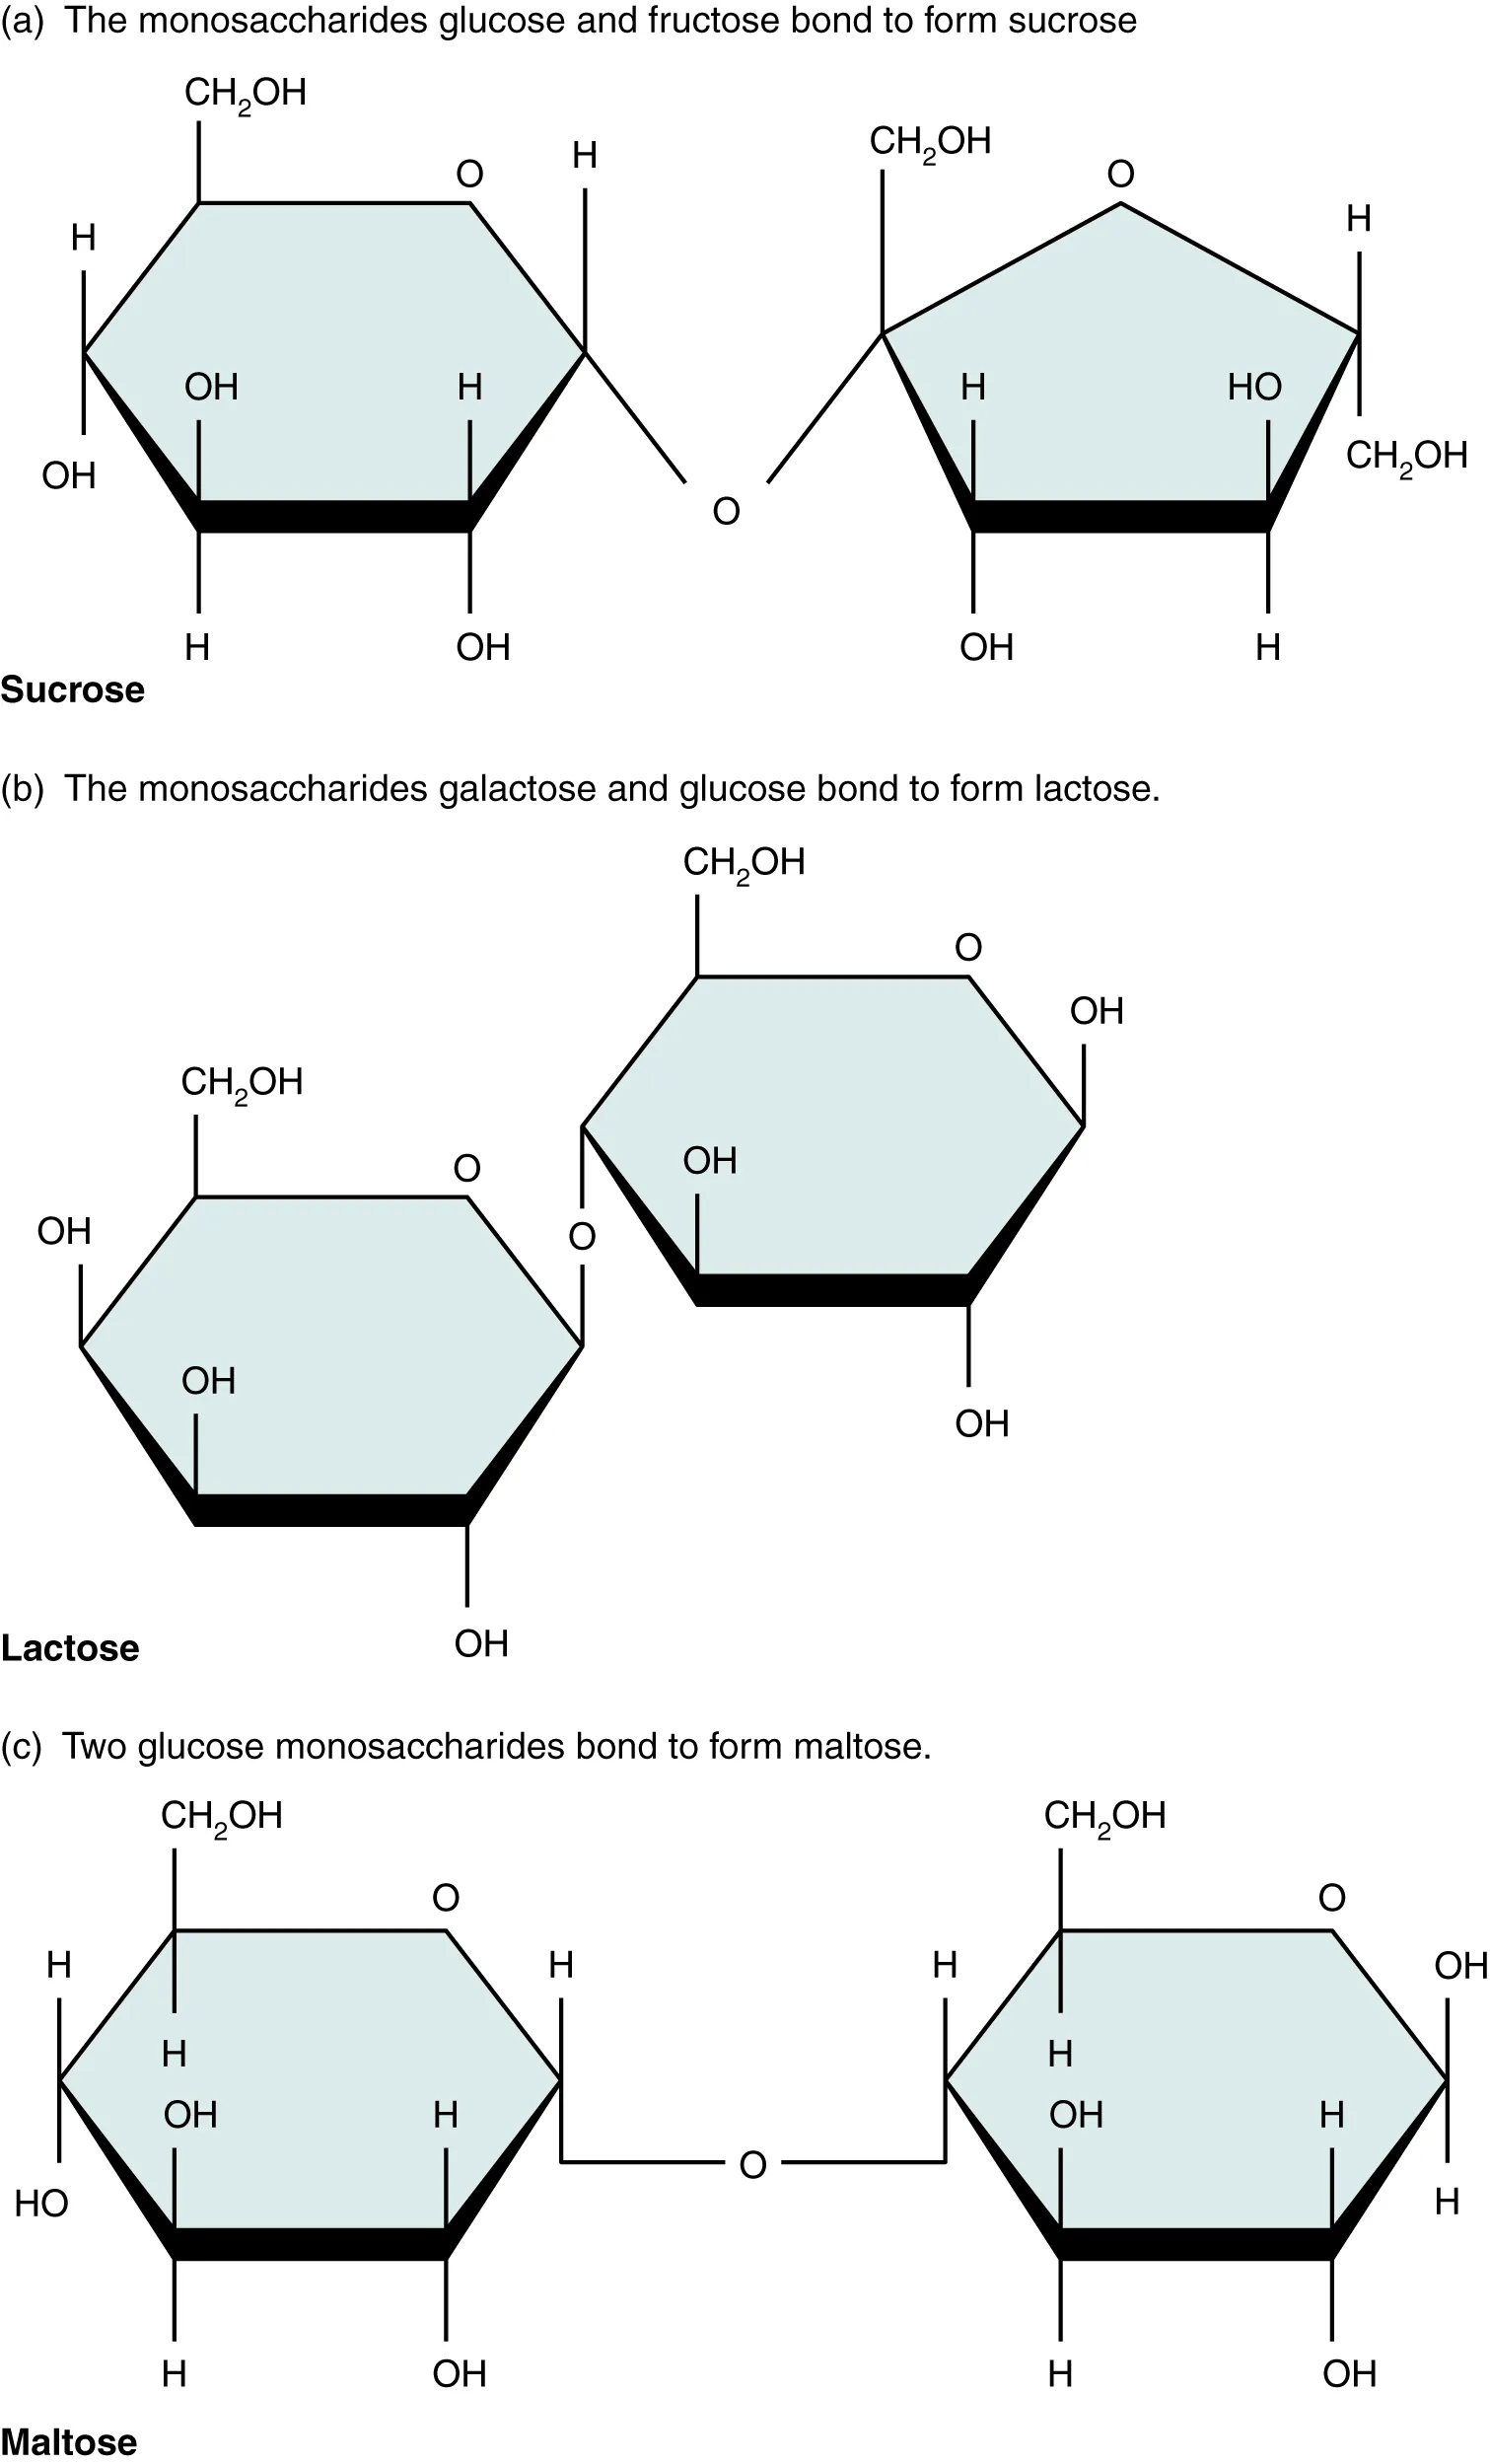 This figure shows the structure of sucrose, lactose, and maltose.